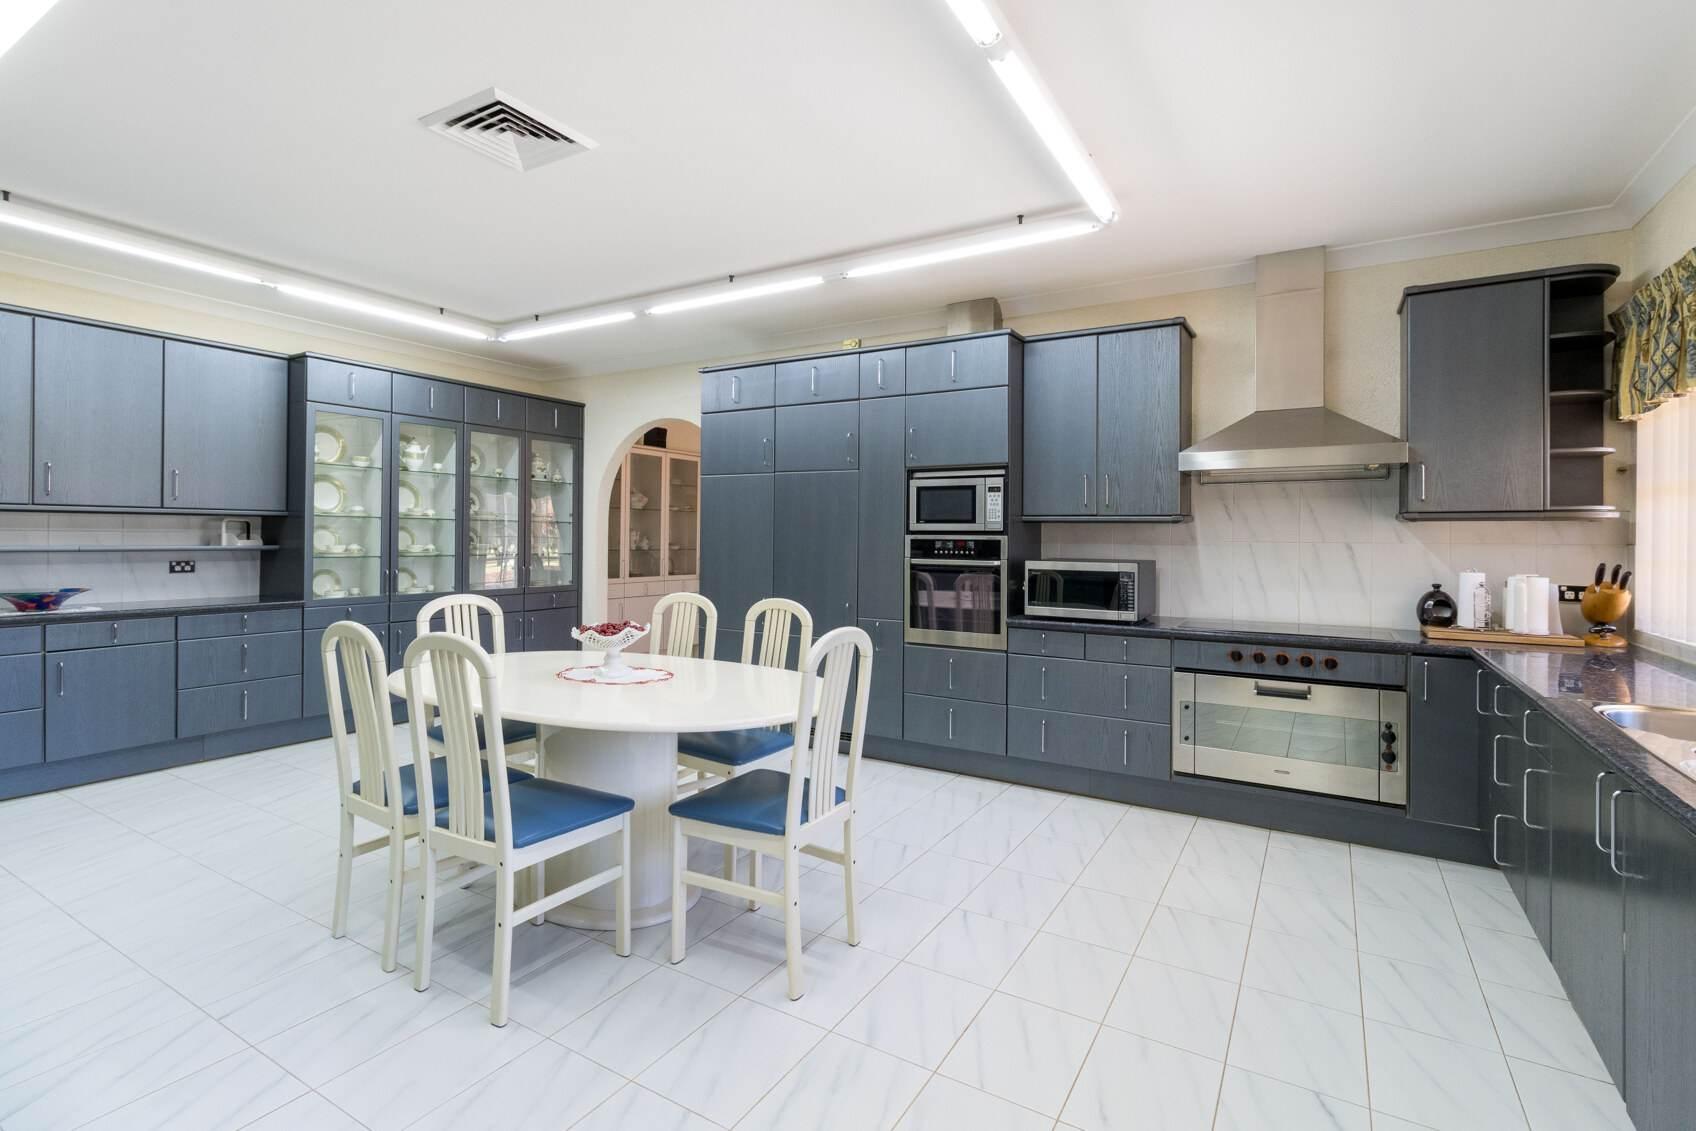 Built in 1986, this rural property for sale NSW is thoroughly modern, with imported German-made kitchen fitted with Gaggenau integrated appliances